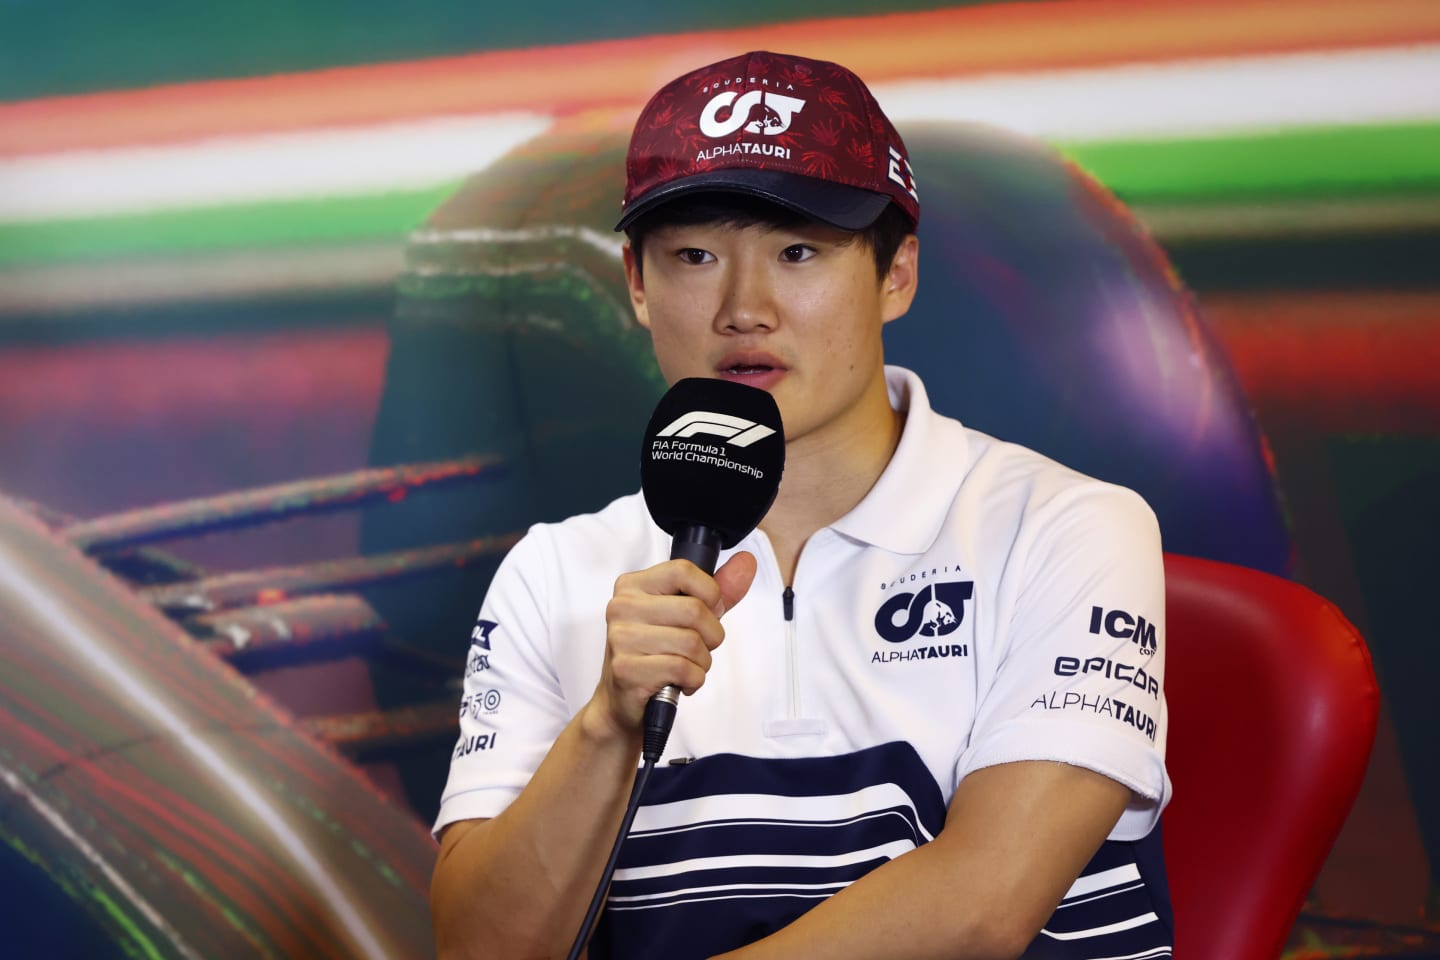 BUDAPEST, HUNGARY - JULY 28: Yuki Tsunoda of Japan and Scuderia AlphaTauri talks in the Drivers Press Conference during previews ahead of the F1 Grand Prix of Hungary at Hungaroring on July 28, 2022 in Budapest, Hungary. (Photo by Bryn Lennon/Getty Images)